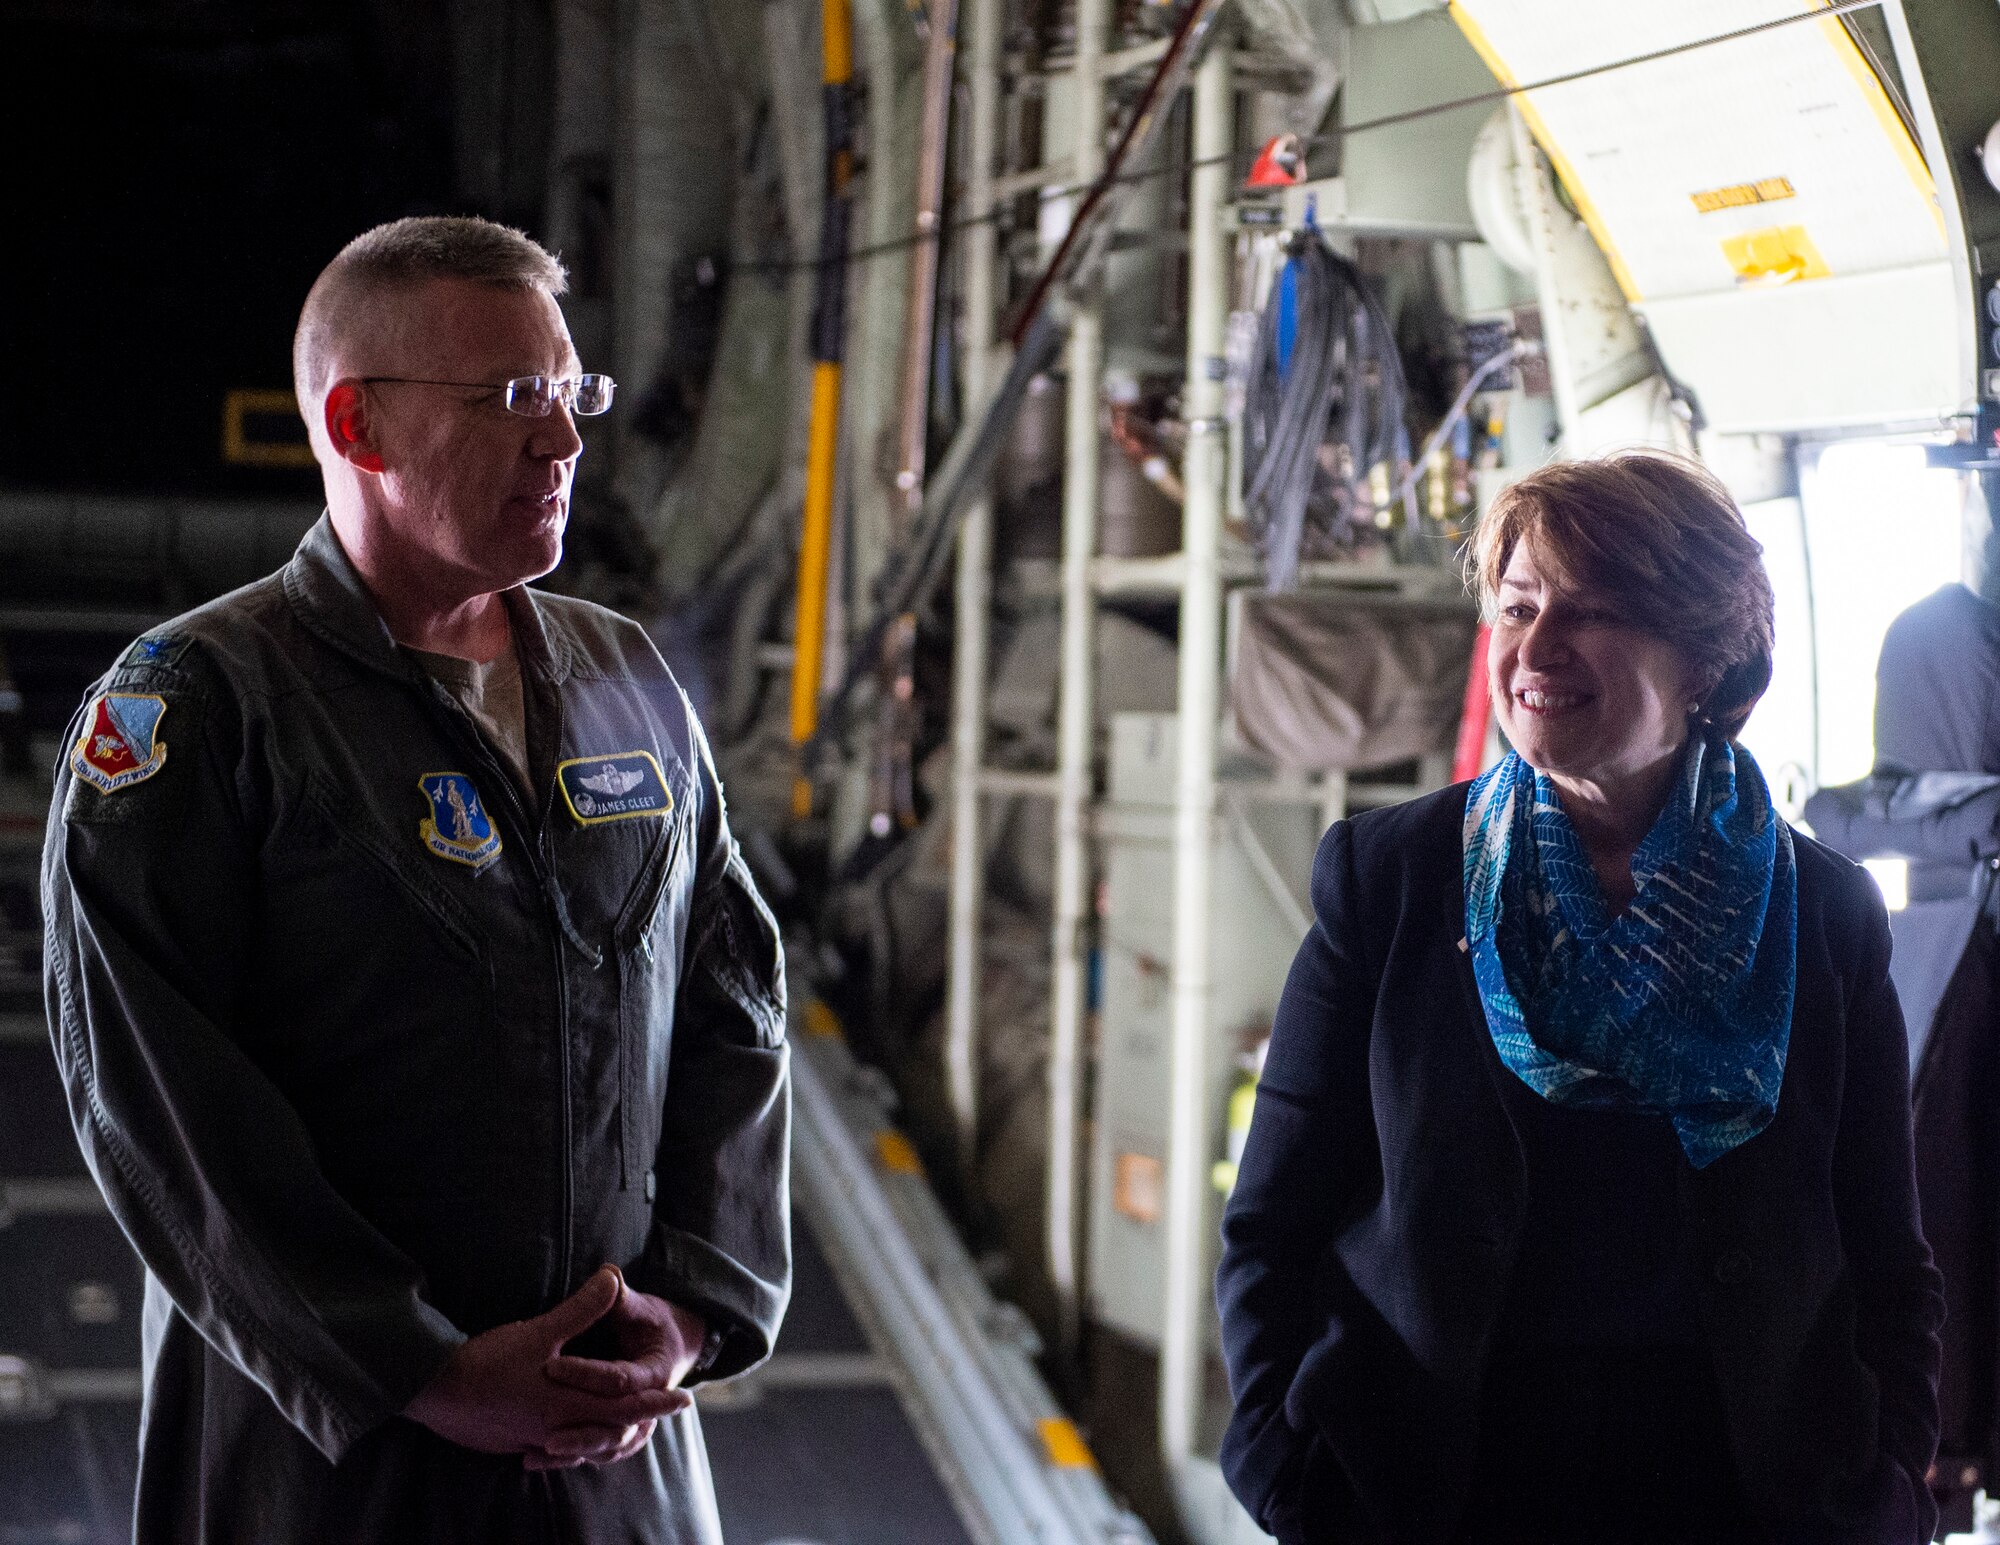 U.S. Air Force Col. James Cleet, Commander, 133rd Airlift Wing and U.S. Sen. Amy Klobuchar, D-Minn., discuss the eight-bladed propeller upgrade to the C-130 in St. Paul, Minn., May 22, 2022.